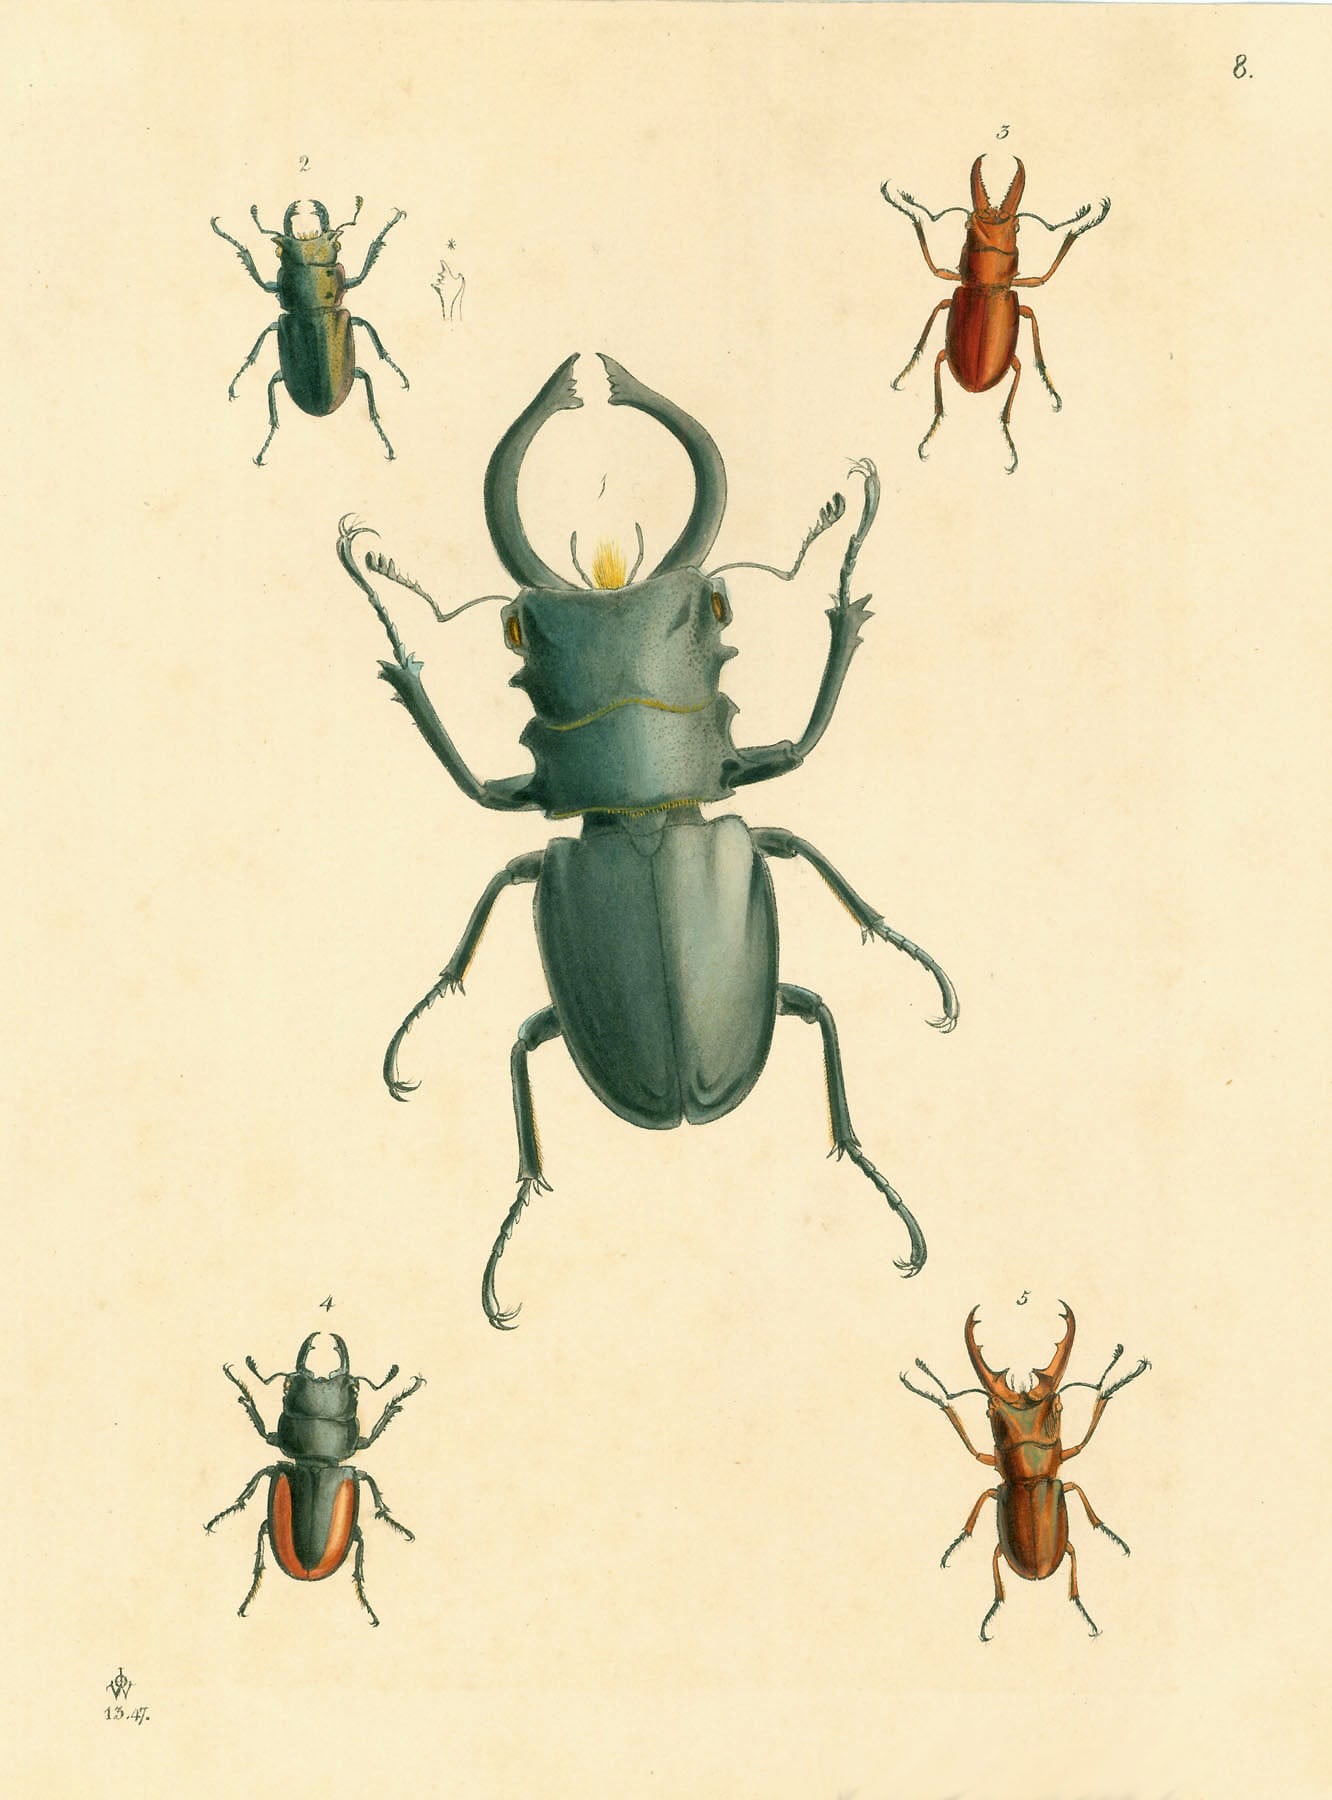 No Title. ( Beetles )  Very fine lithograph with original hand coloring.  Published ca 1850.